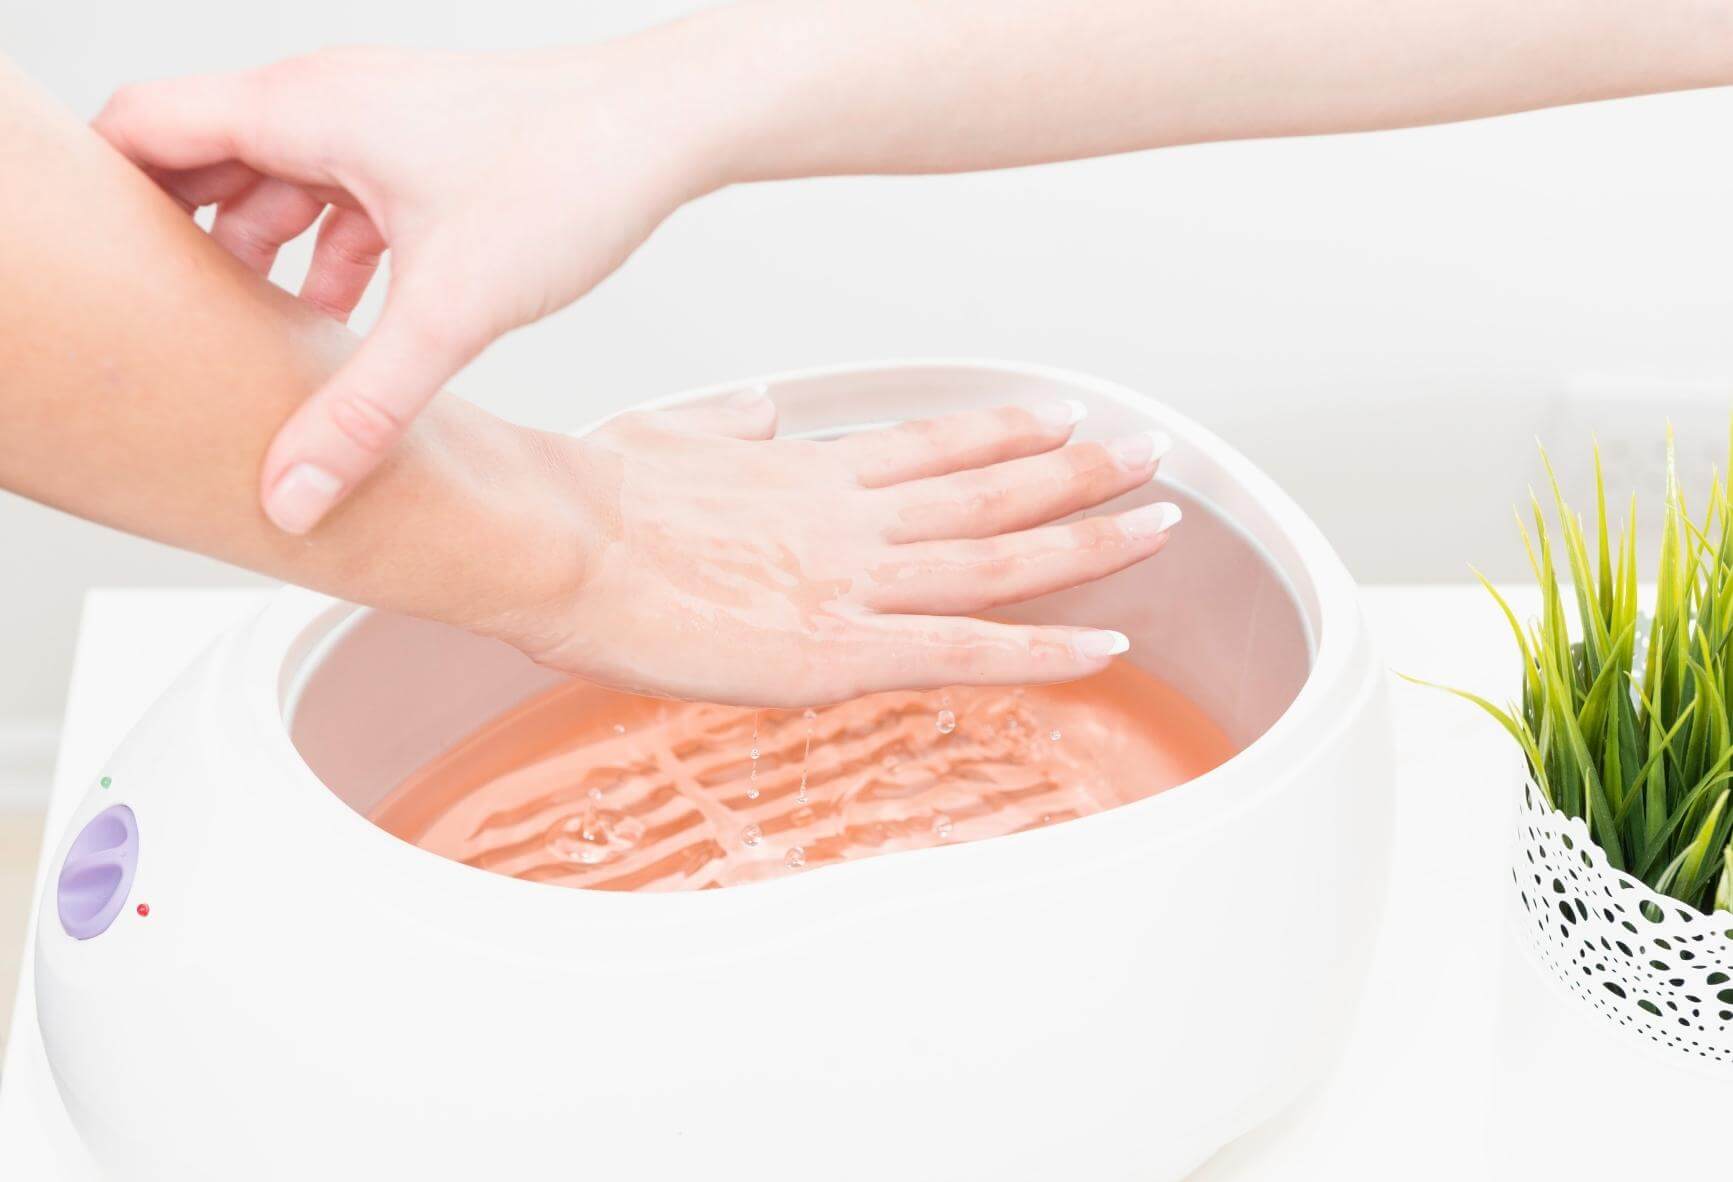 Hand hovering above a paraffin wax dip